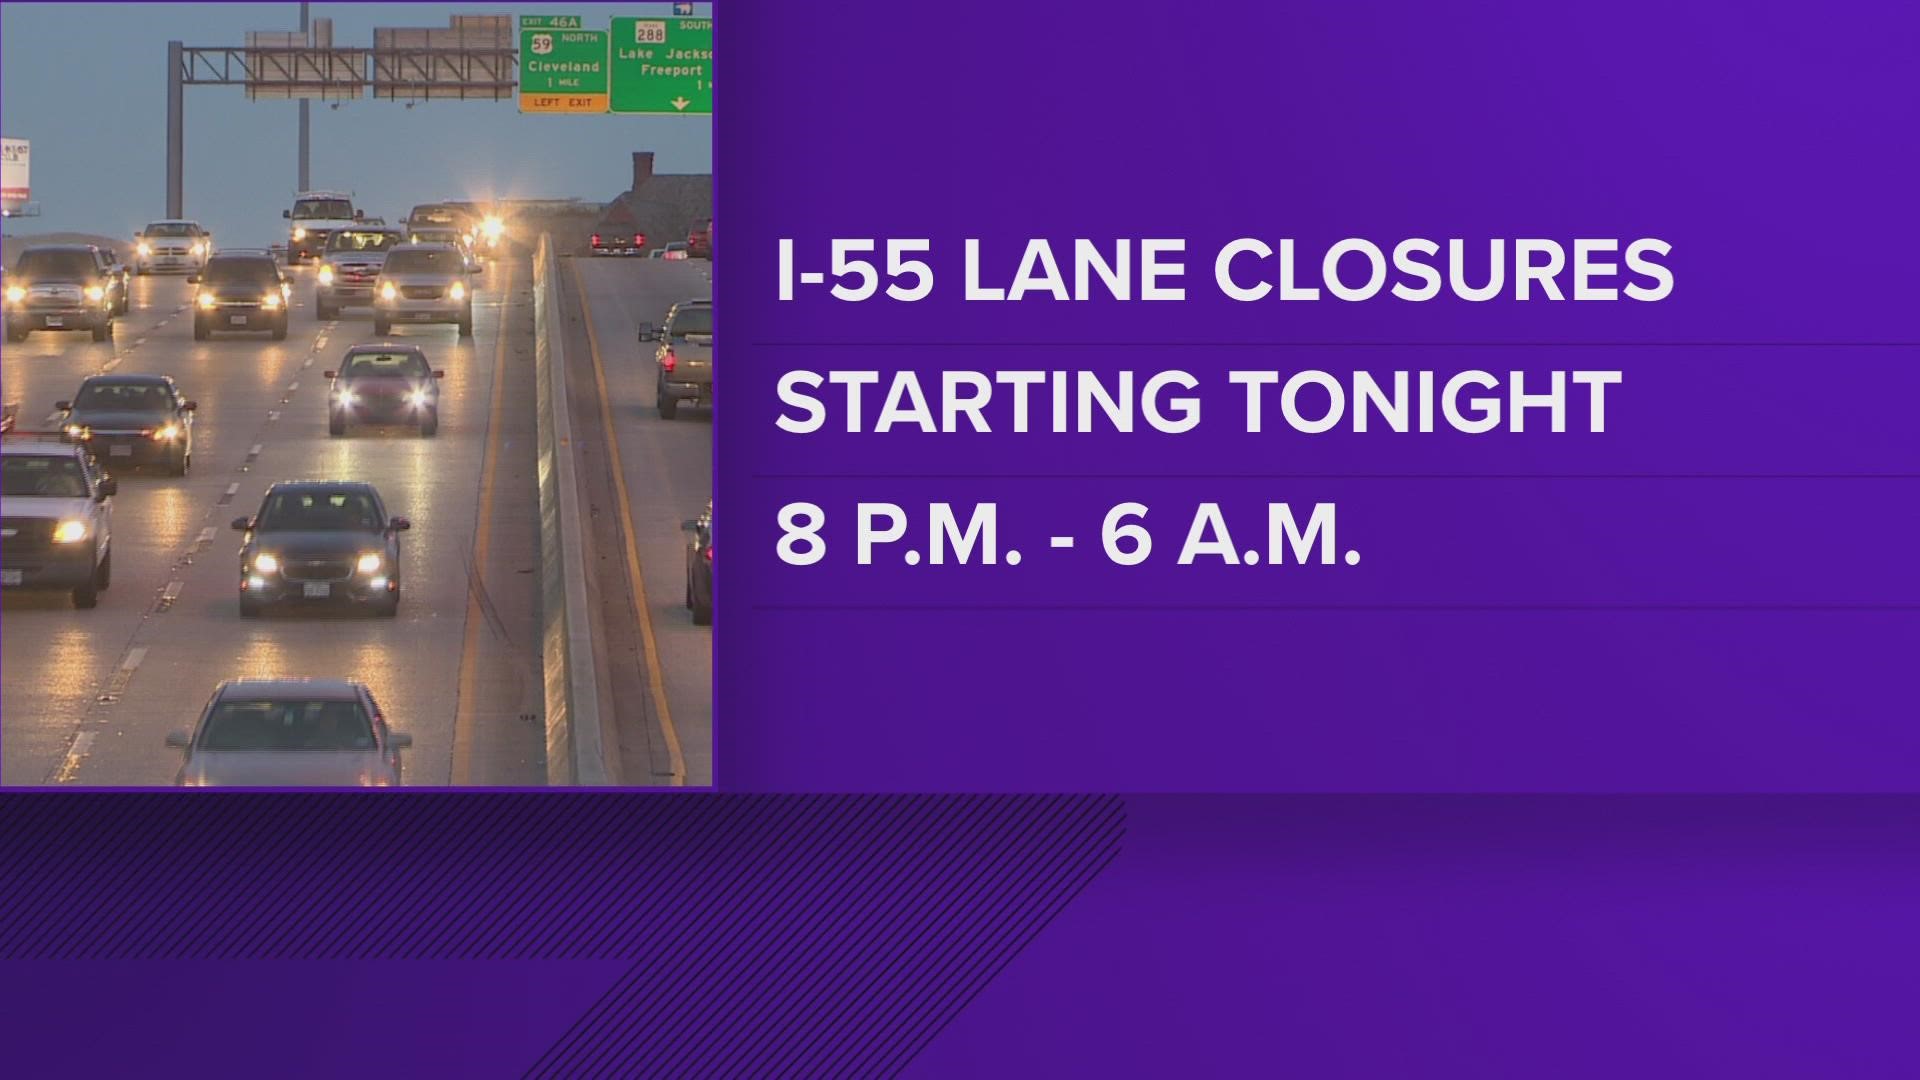 Closures on the southbound lanes are to be expected starting Monday, June 13 at 8 p.m.